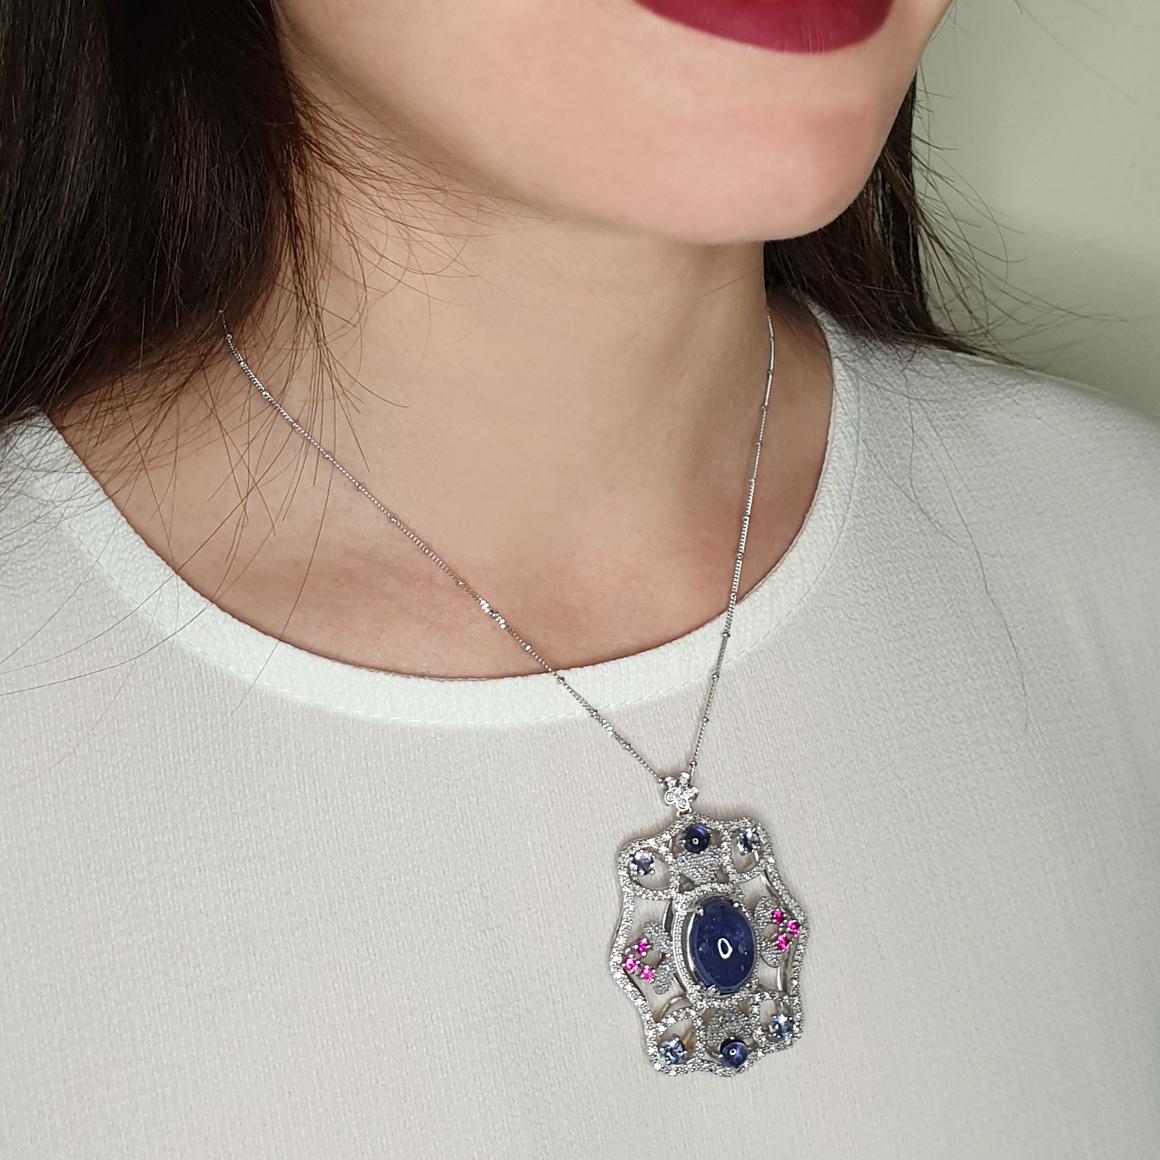 Timeless pendant unique and elegant made in Italy by Stanoppi Jewellery since 1948.
Pendant with chain in 18k white gold with Tanzanite (oval cabochon cut, size:12x15 mm; round cabochon cut, size:5 mm; round cut, size:4 mm), pink Tourmaline (round